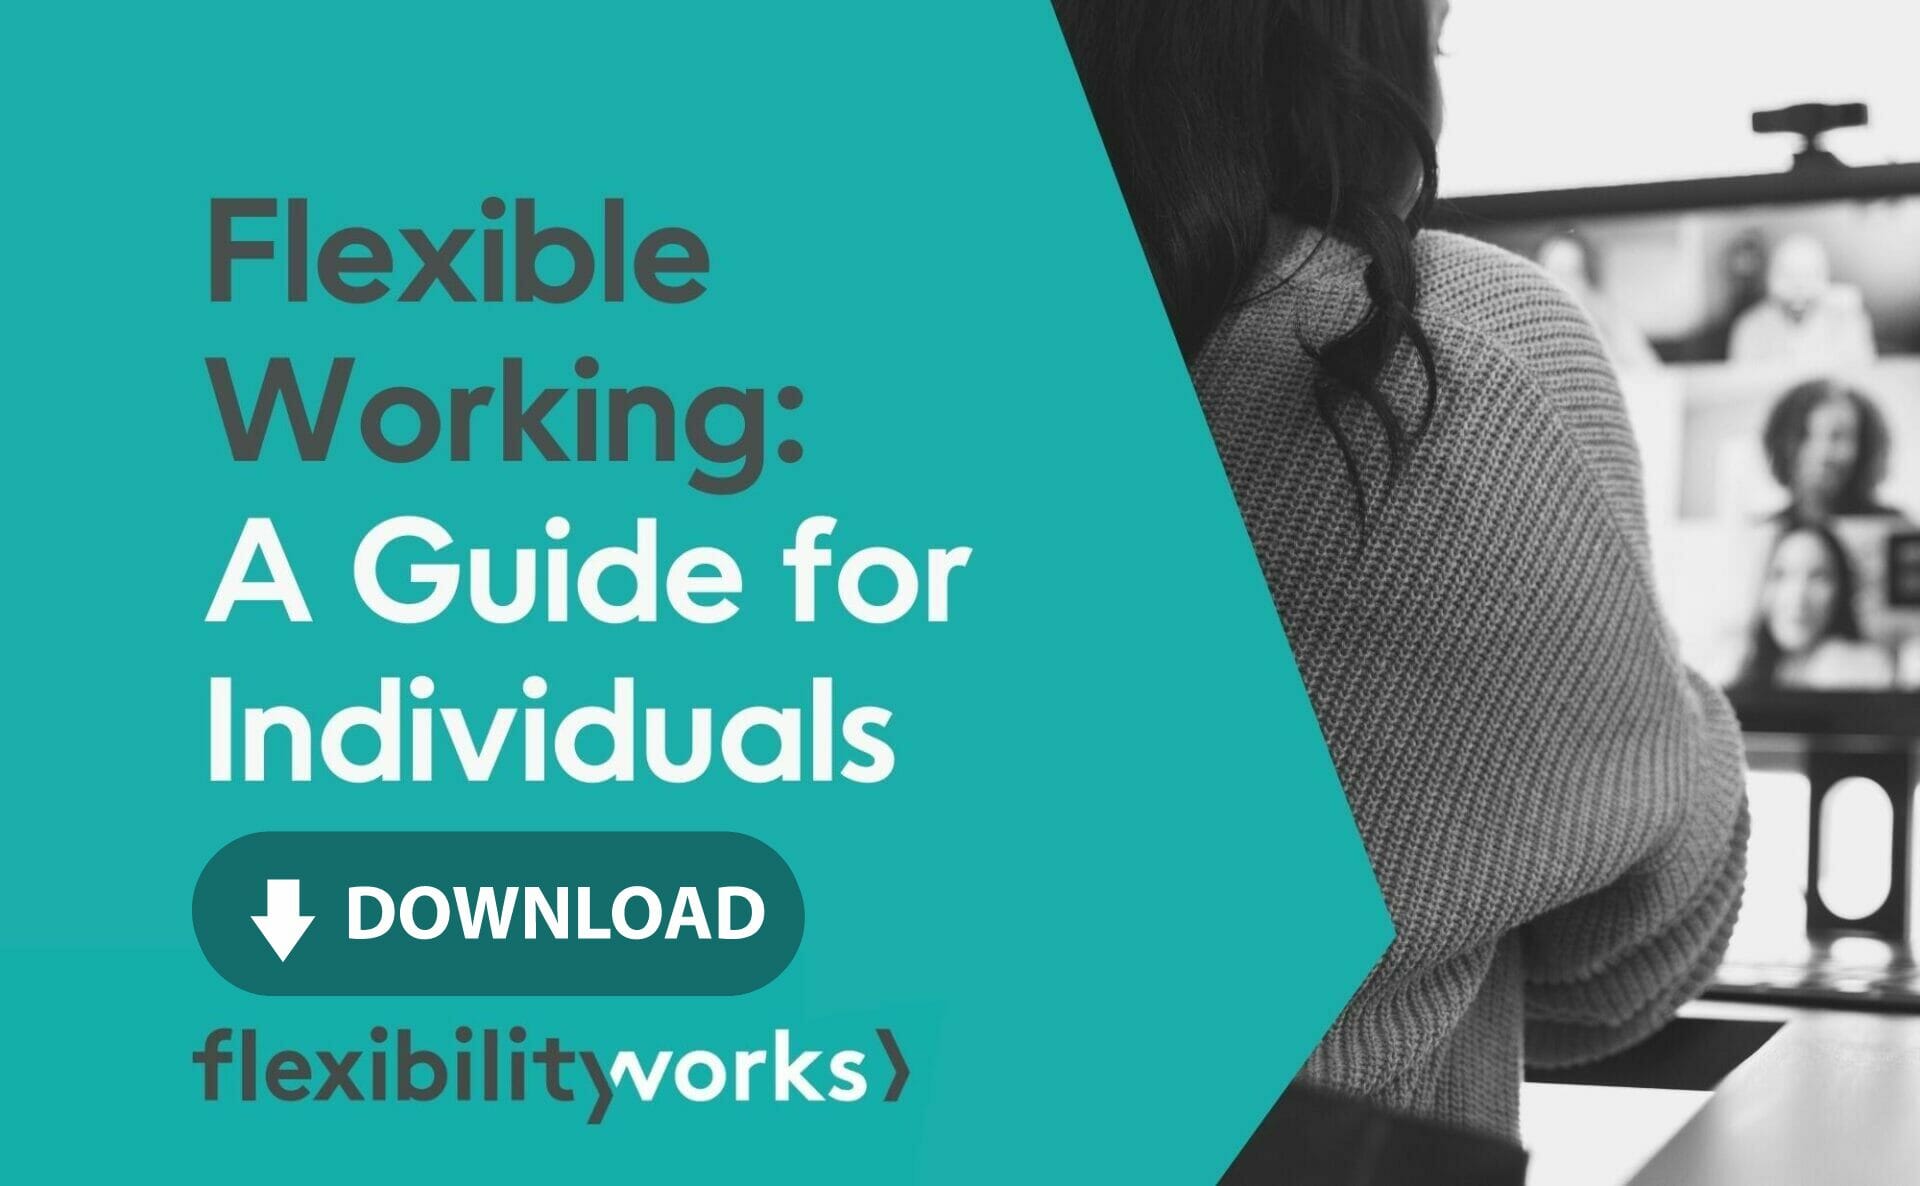 Flexible Working Individuals Guide